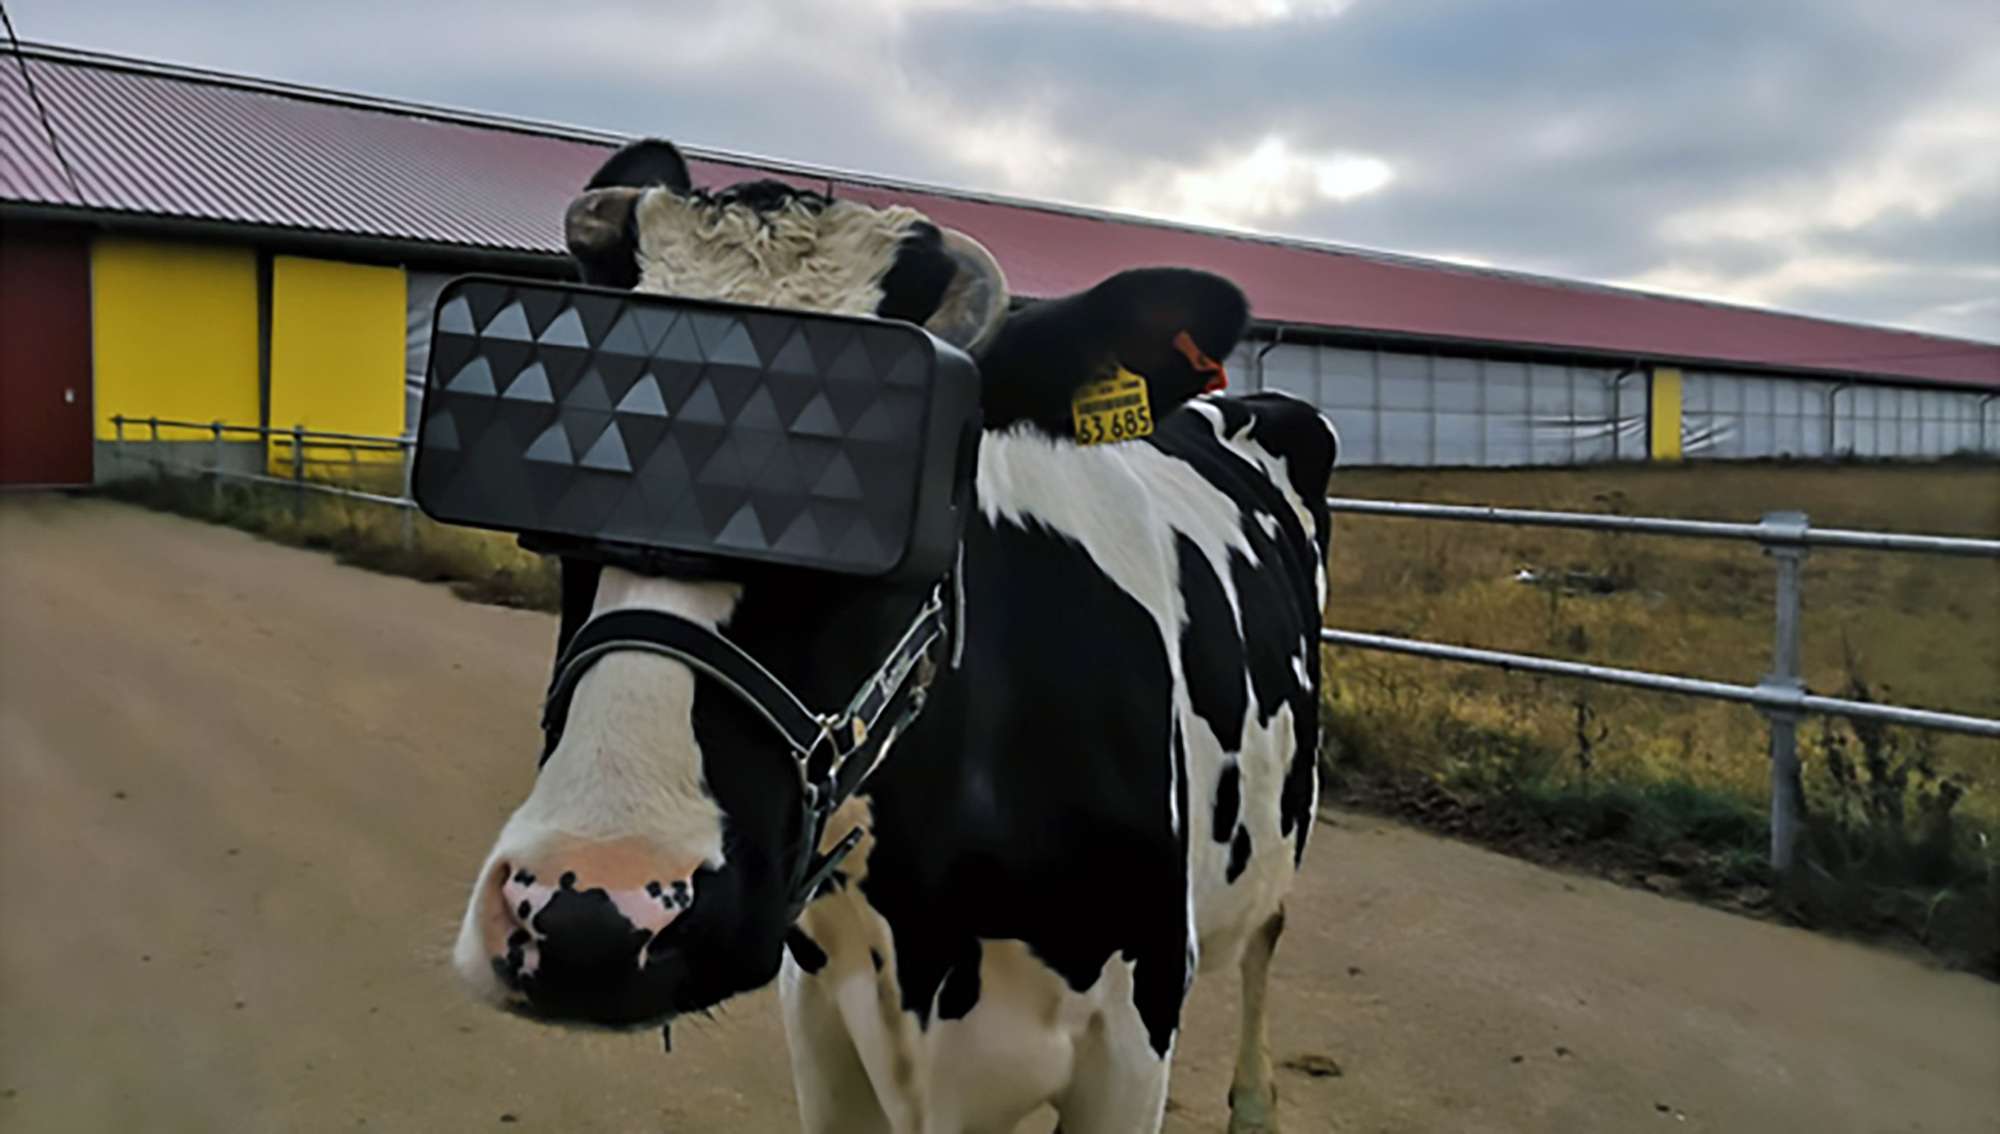 Sad Cows Fitted With VR Headset Showing Sunny Fields